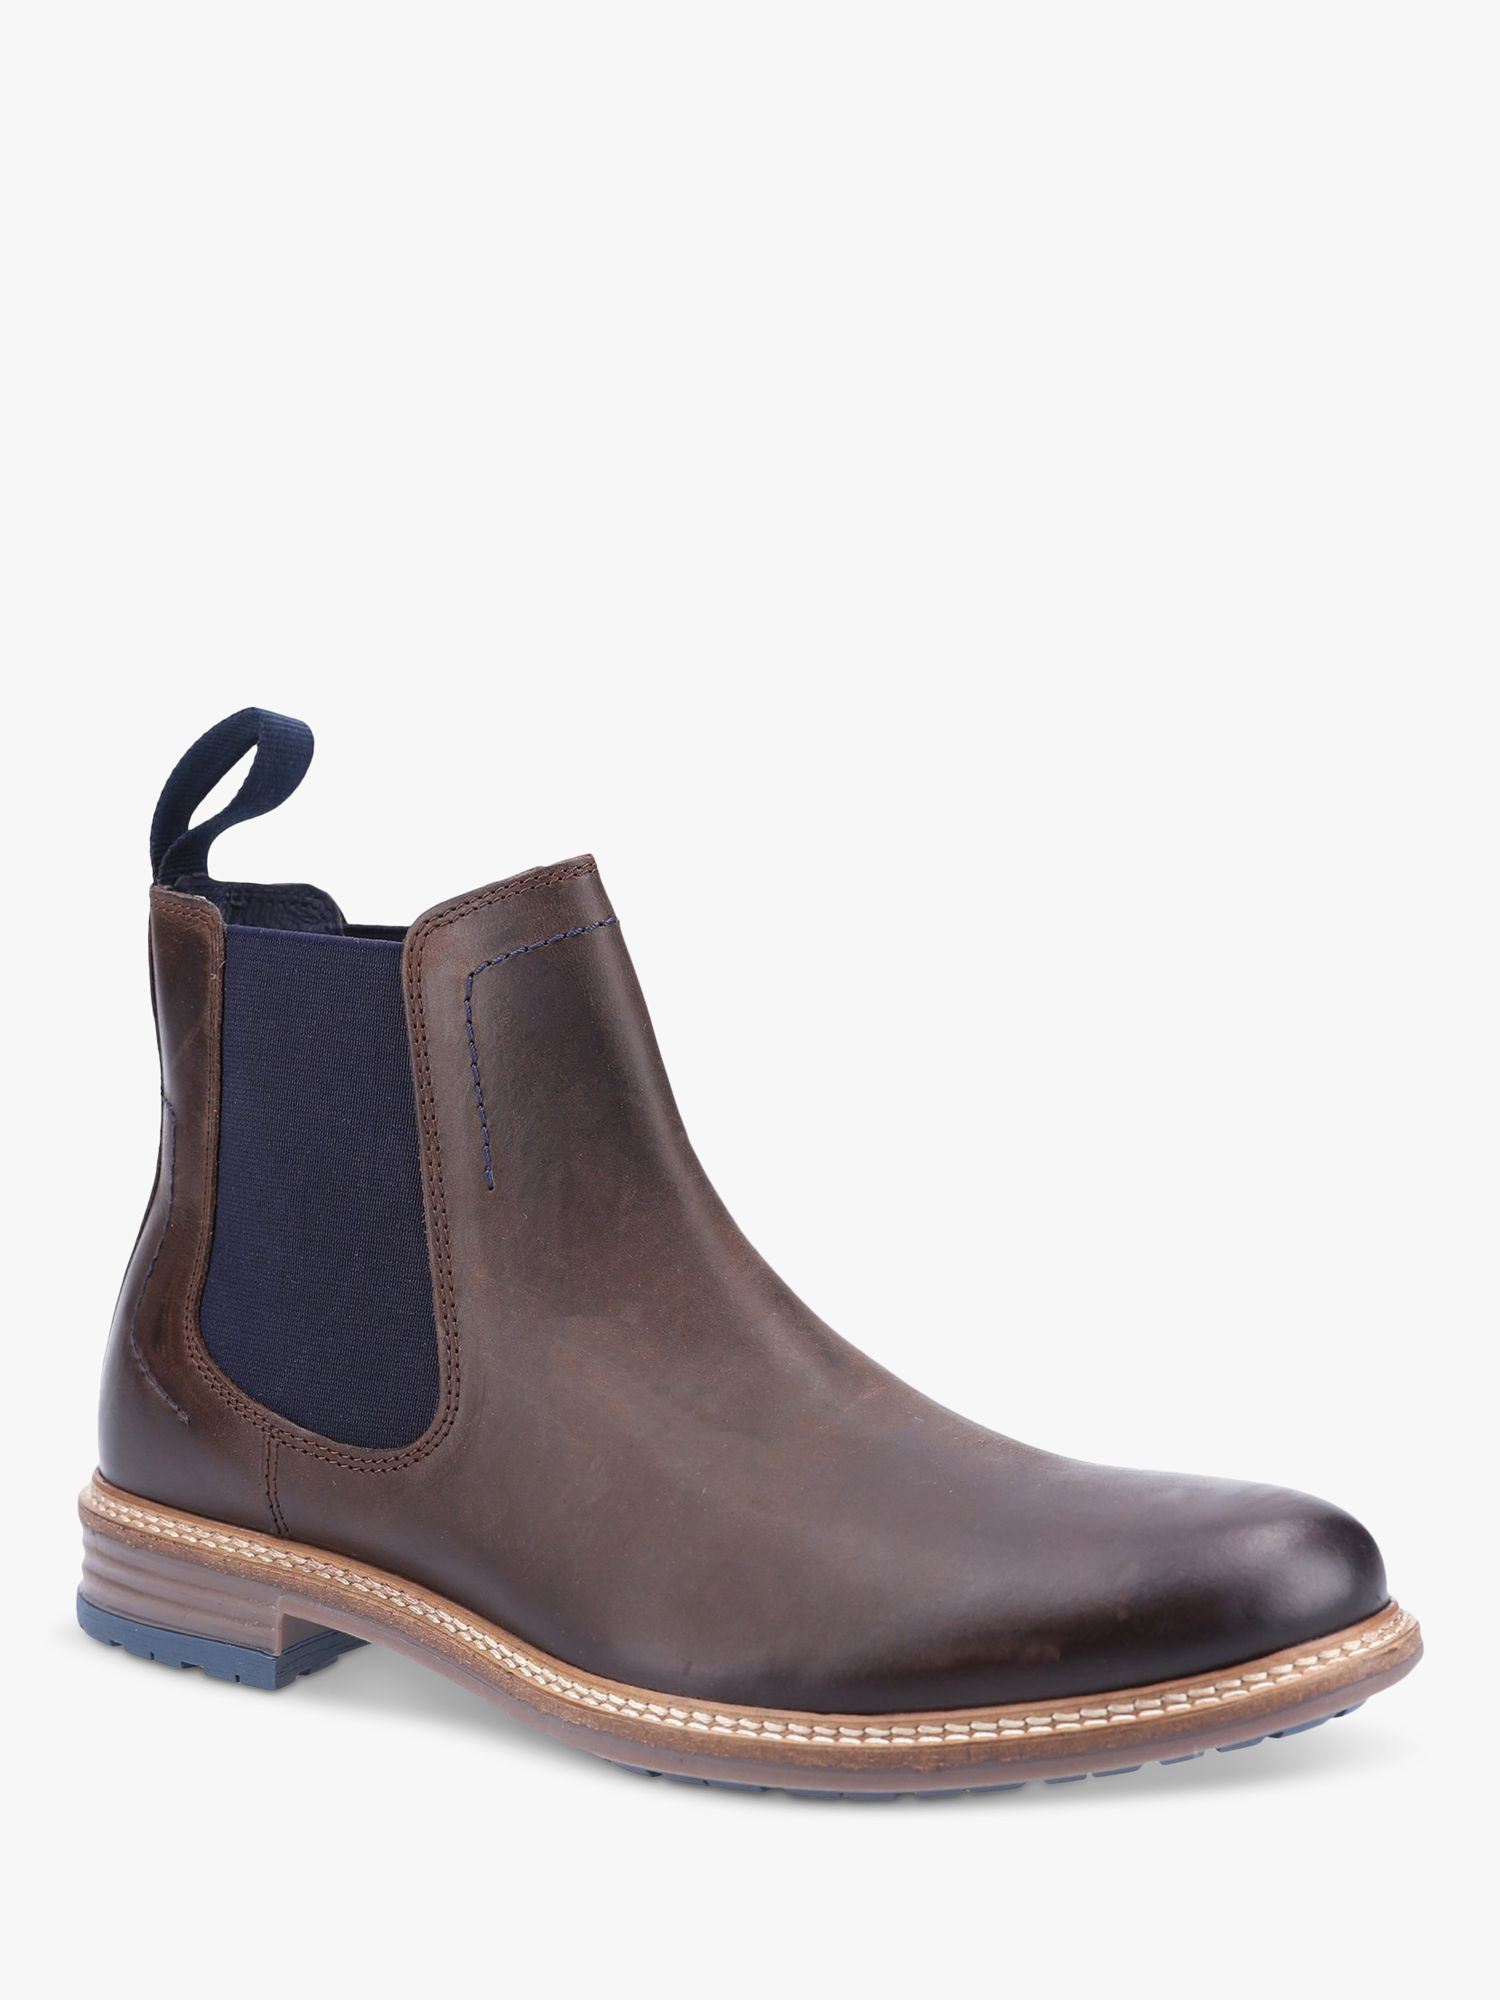 Hush Puppies Justin Chelsea Boots, Brown at John Lewis & Partners